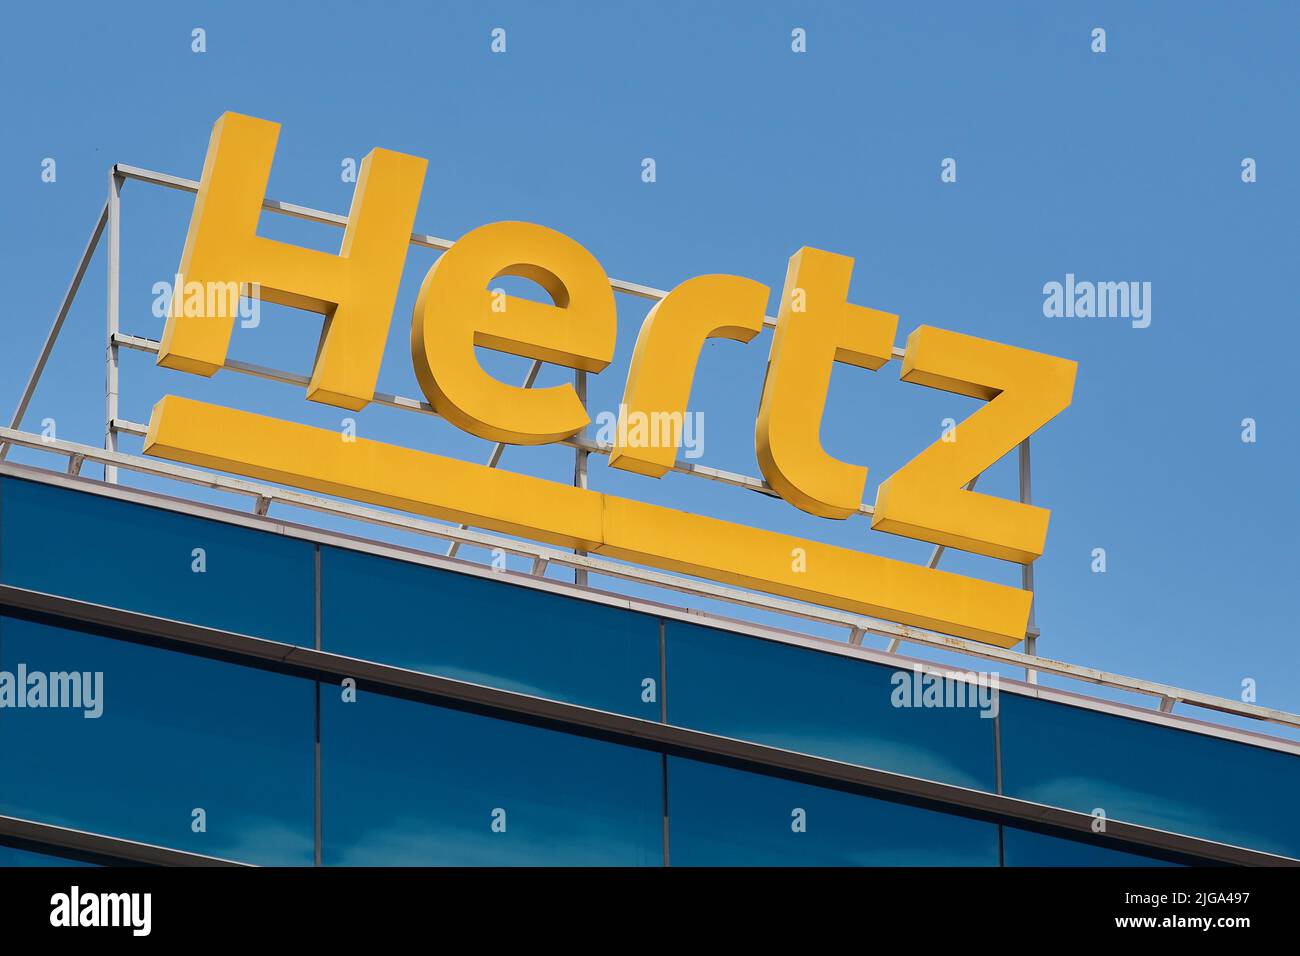 Bucharest, Romania - July 05, 2022: The logo of the American car rental company Hertz can be seen on a building. This image is for editorial use only. Stock Photo